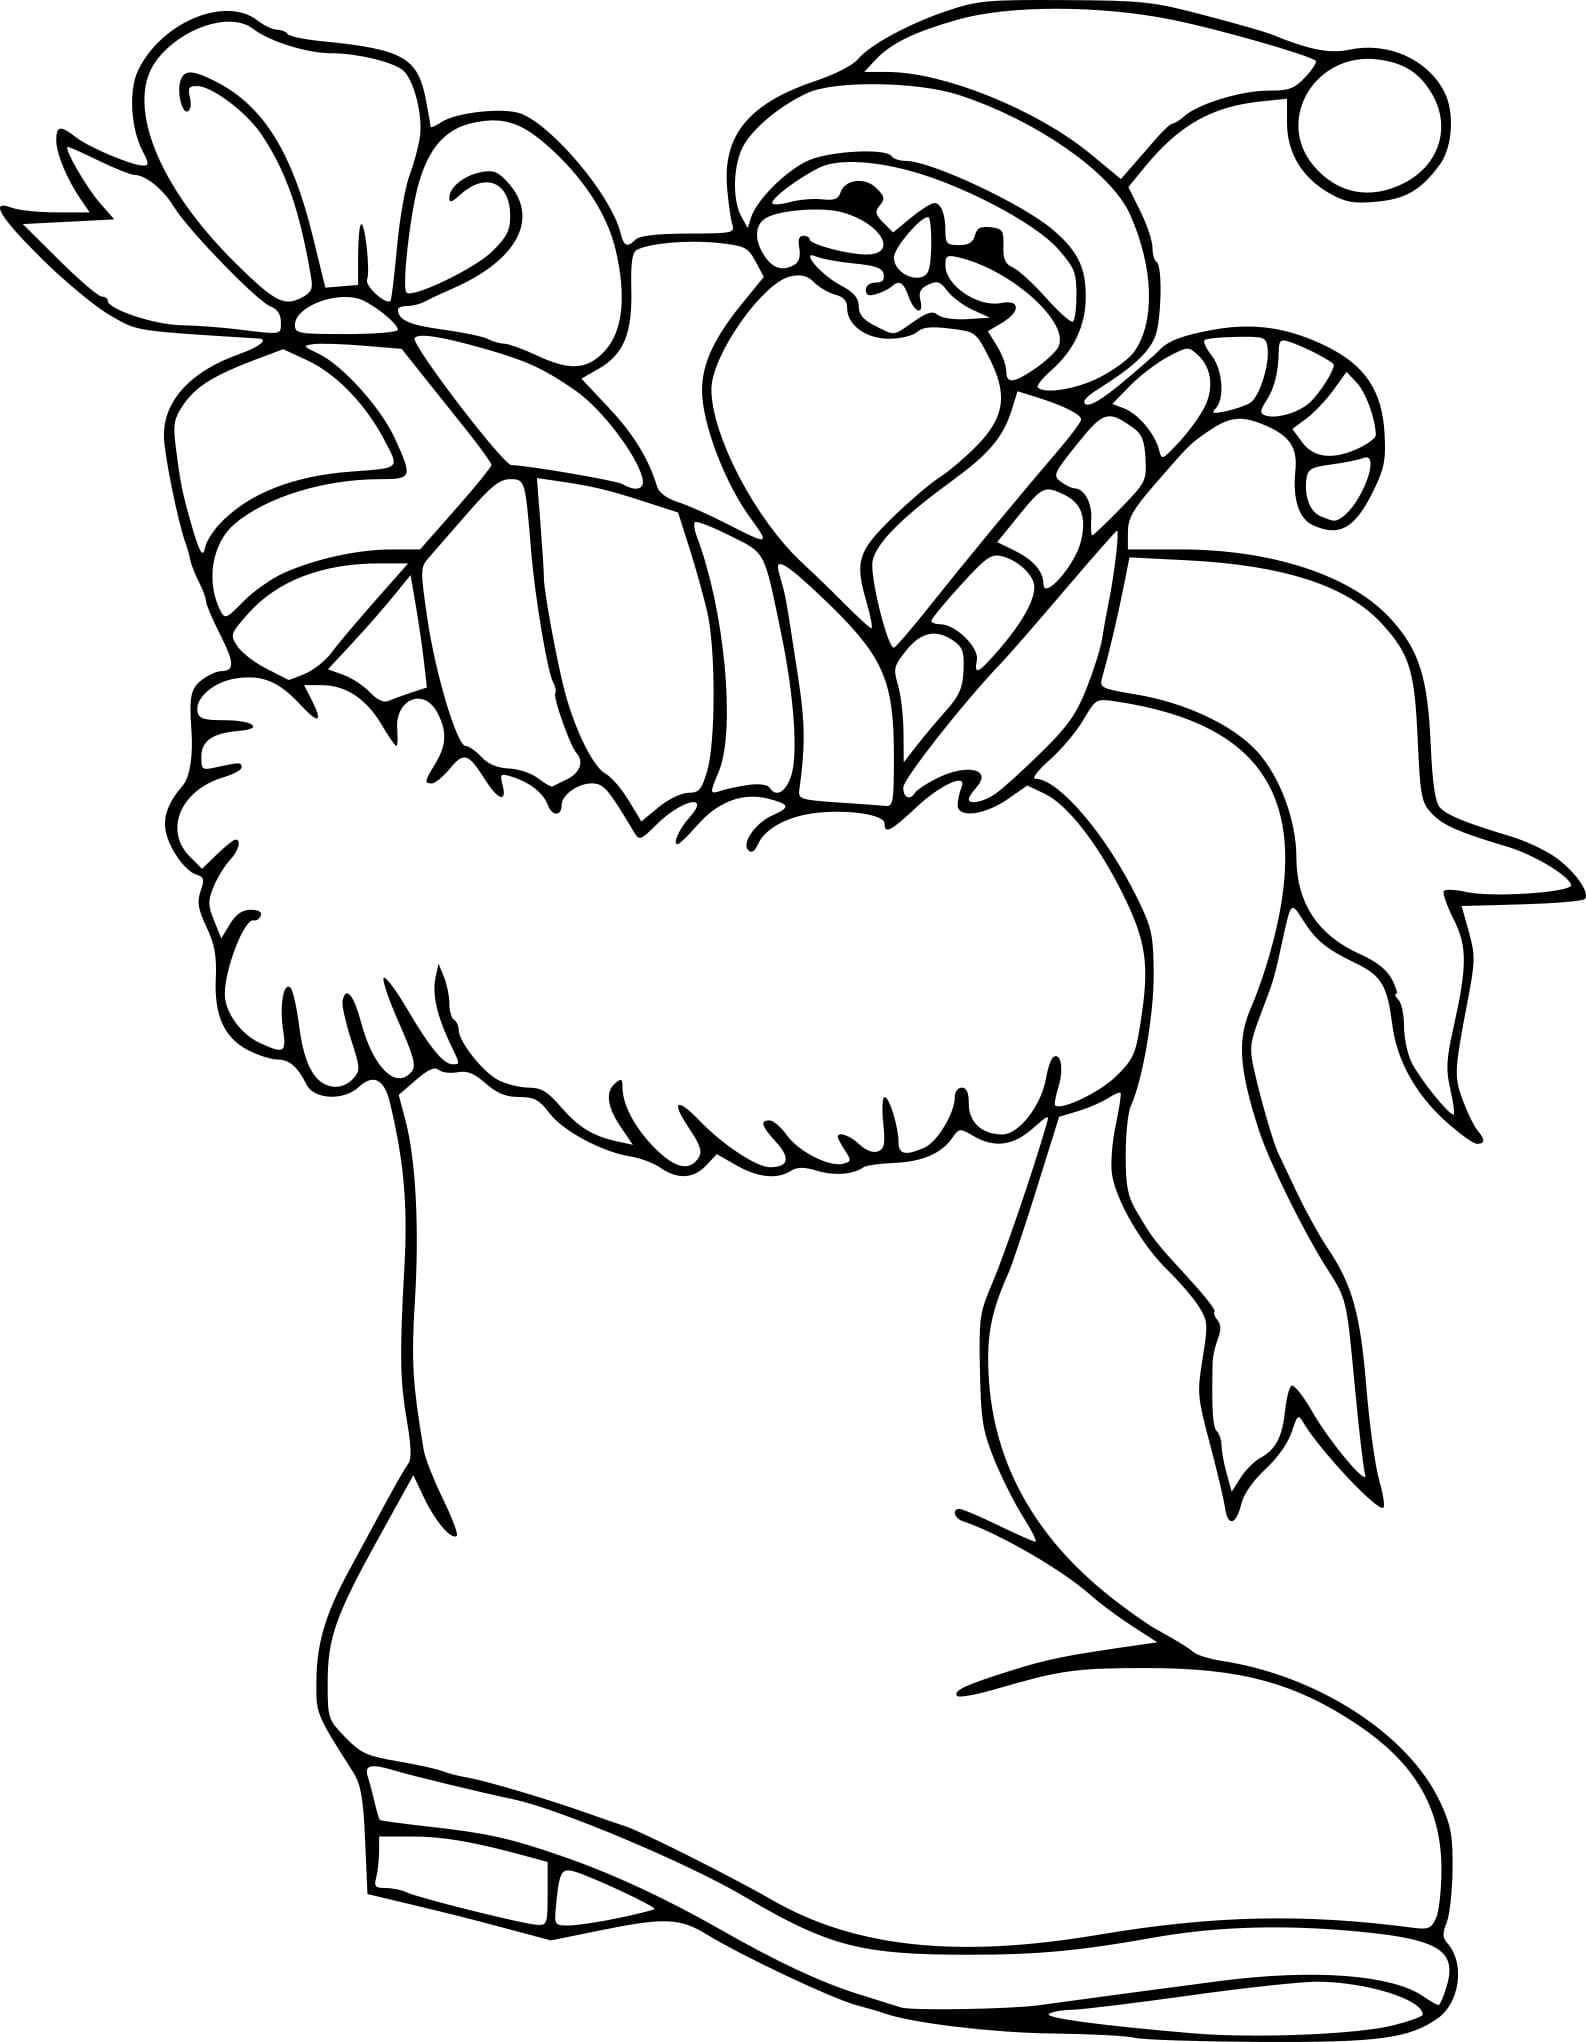 Santa Claus Boot With Gifts Coloring Page